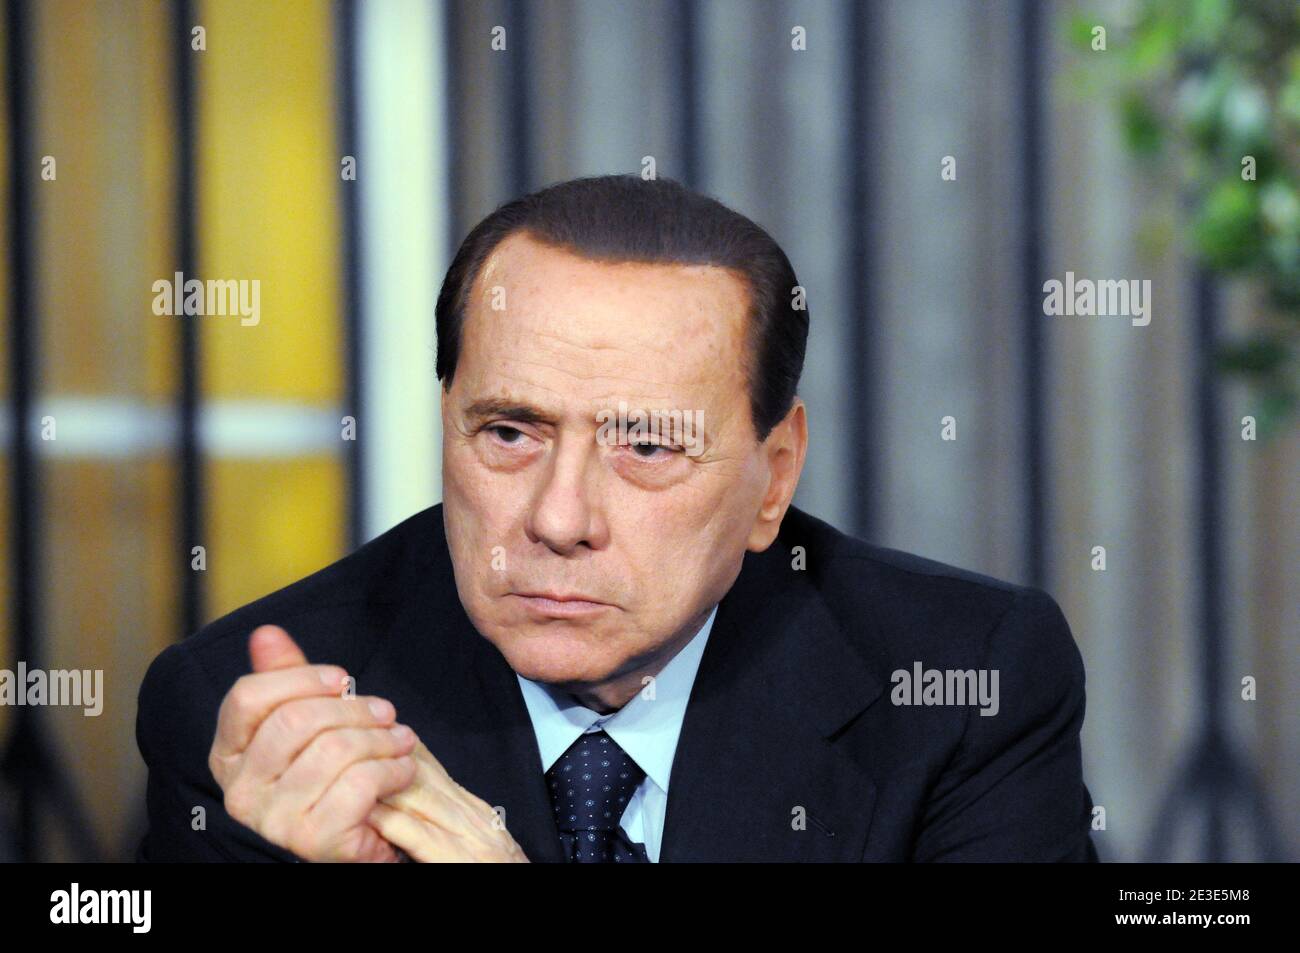 Italian Prime Minister Silvio Berlusconi seems quite tired, and sometimes sleepy, during a joint press conference with other European leaders at the residence of Israeli Prime Minister Ehud Olmert in Jerusalem, Israel on January 18, 2009. Photo by Ammar Abd Rabbo/ABACAPRESS.COM Stock Photo